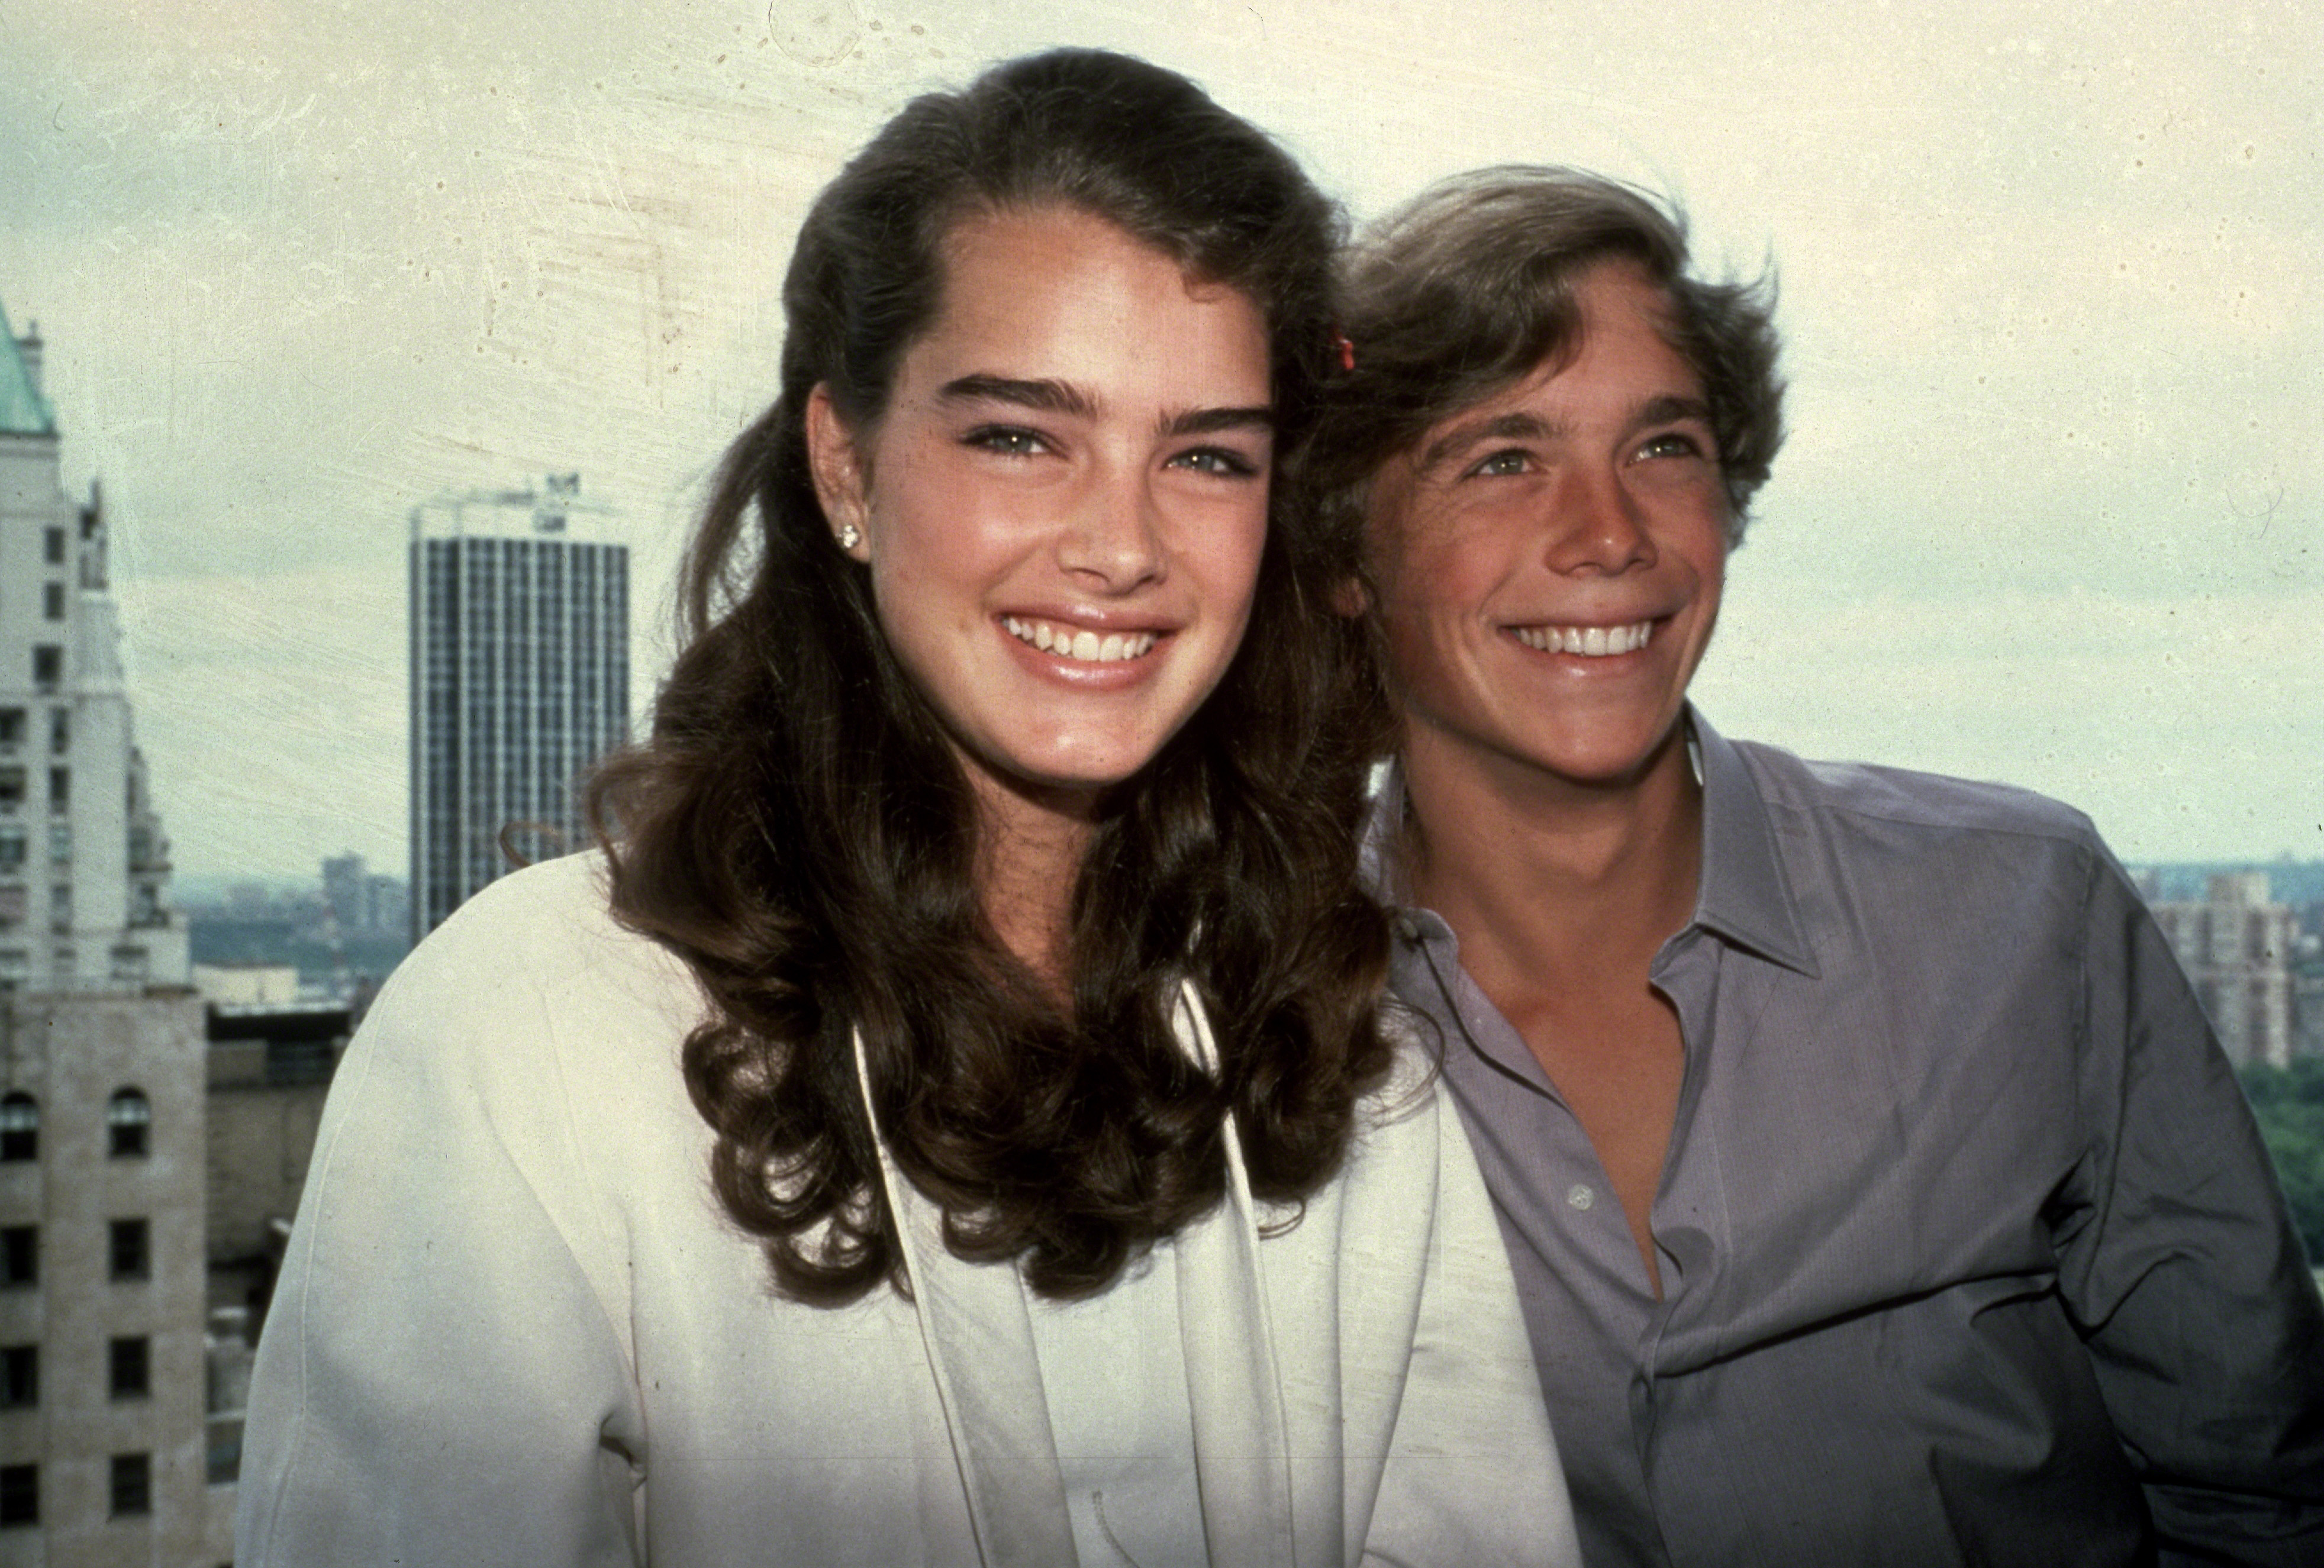 Brooke Shields et Christopher Atkins à New York, vers 1980. | Source : Getty Images